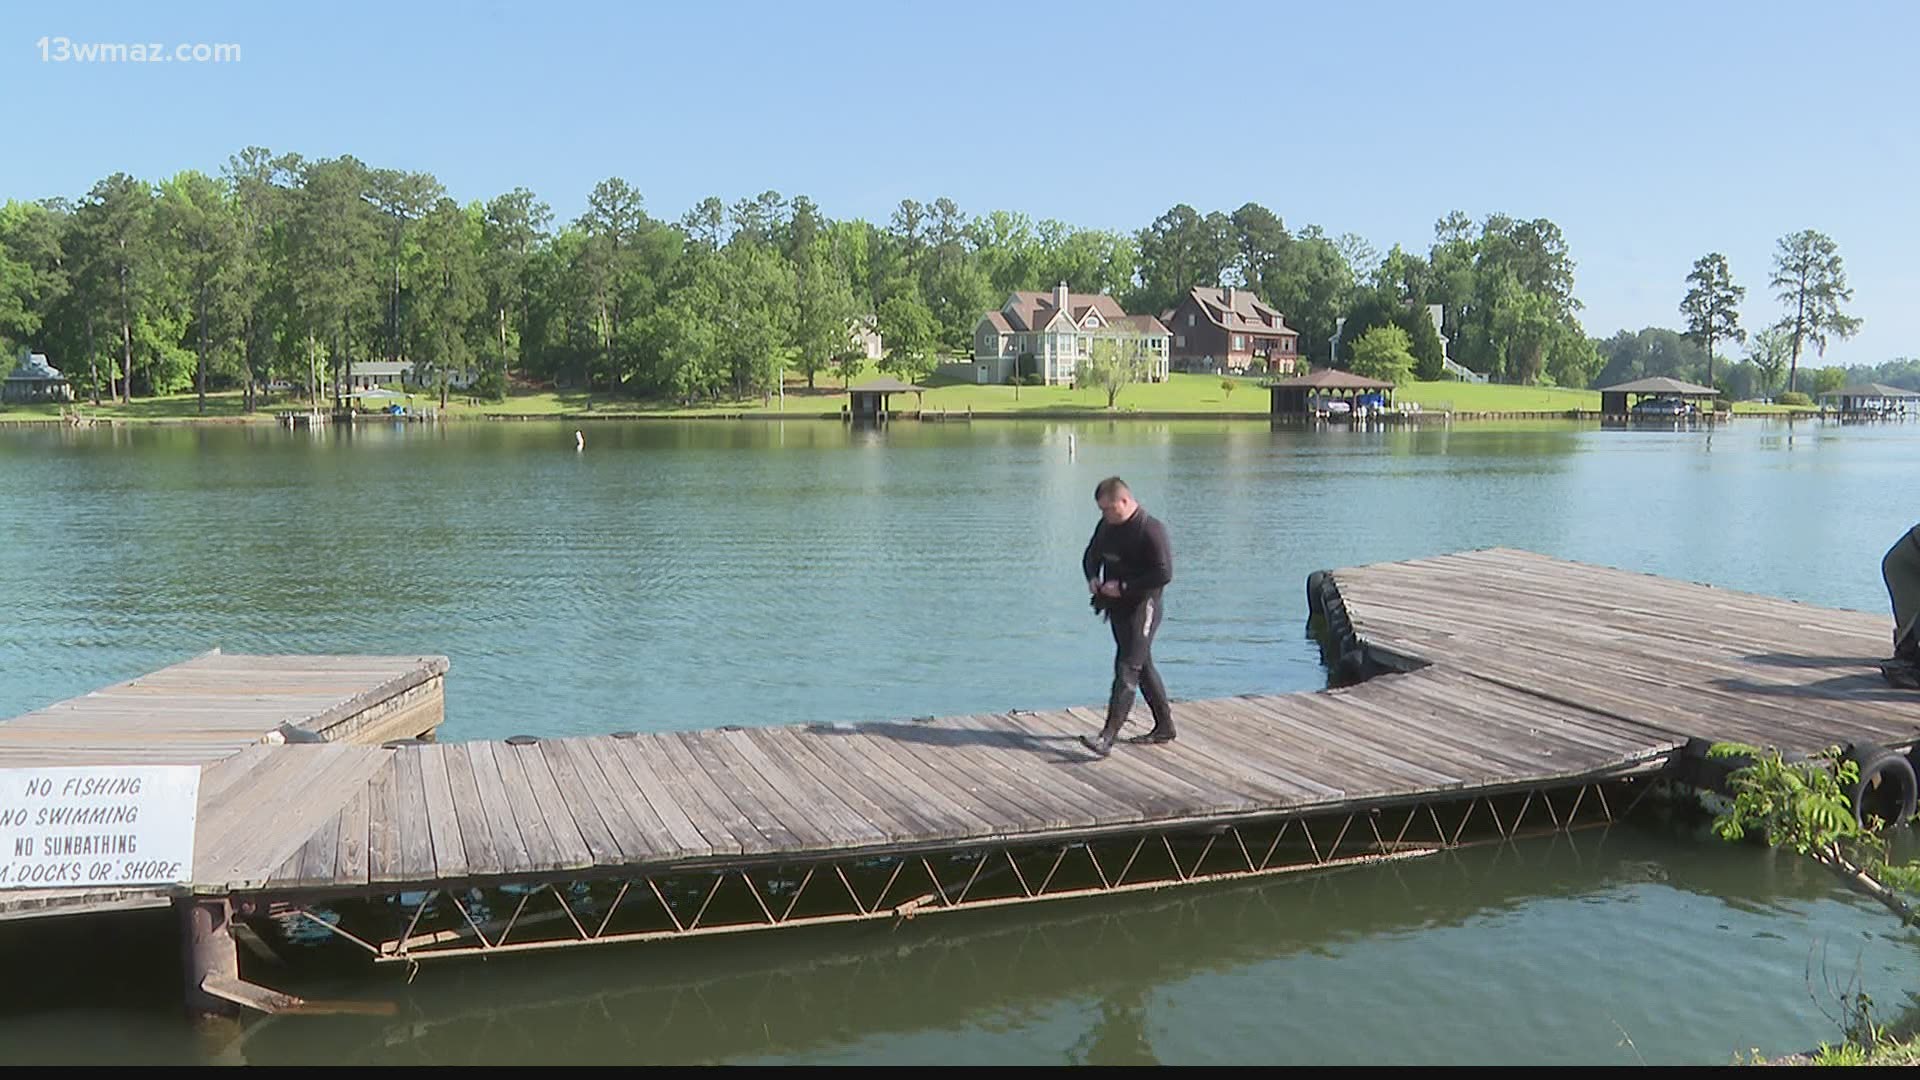 Crews recovered the body of a 12-year-old boy from Lake Sinclair Monday morning. They had been working to find the drowning victim since Sunday night.